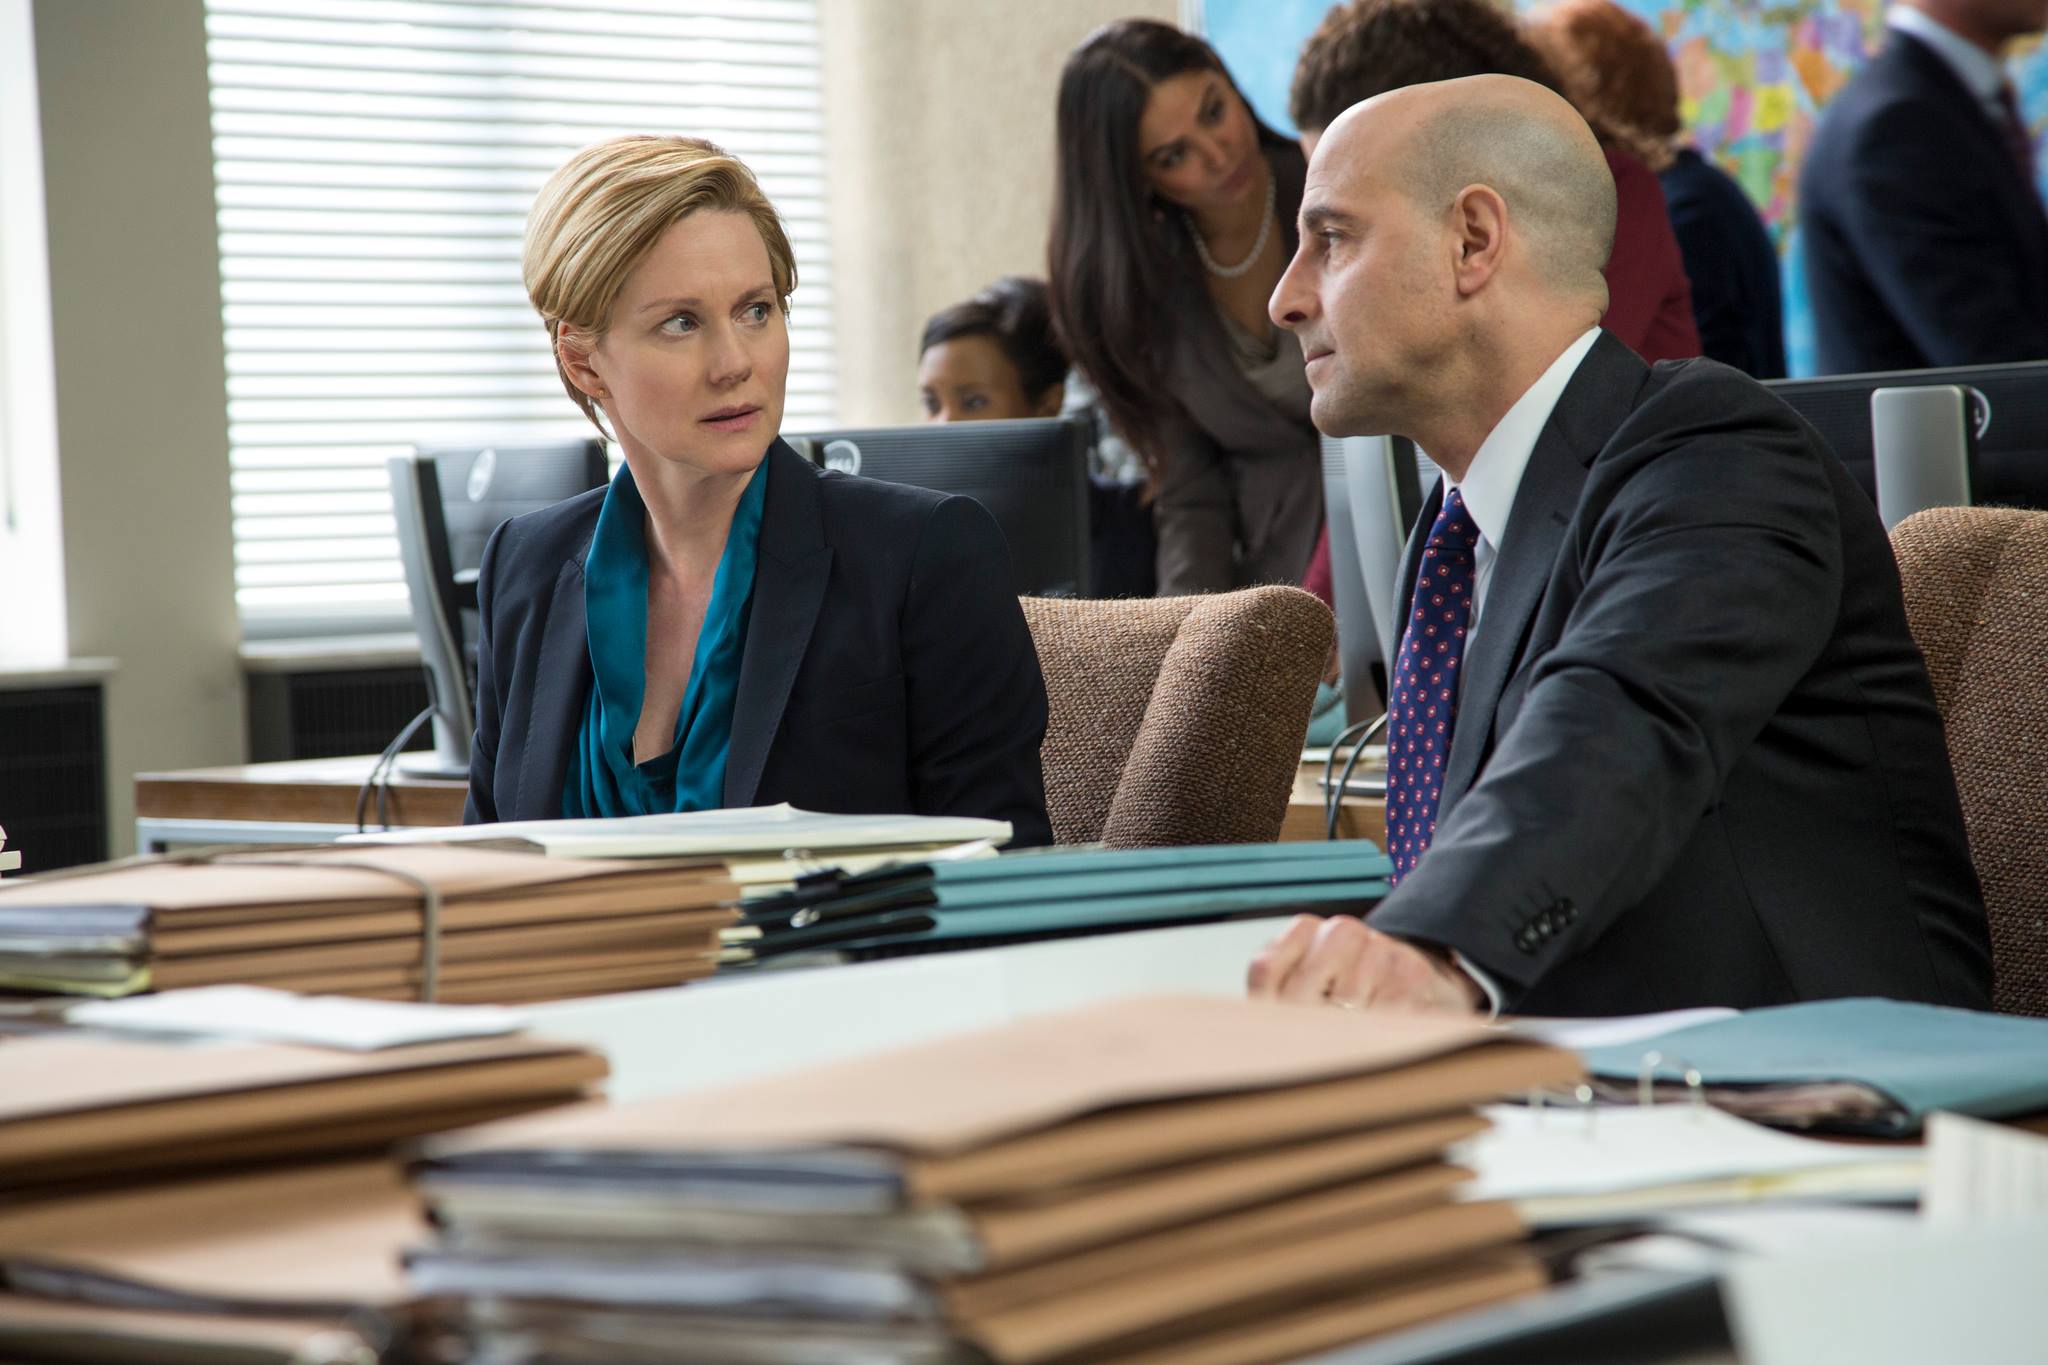  Laura Linney and Stanley Tucci star as Sarah Shaw and James Boswell in The Fifth Estate.